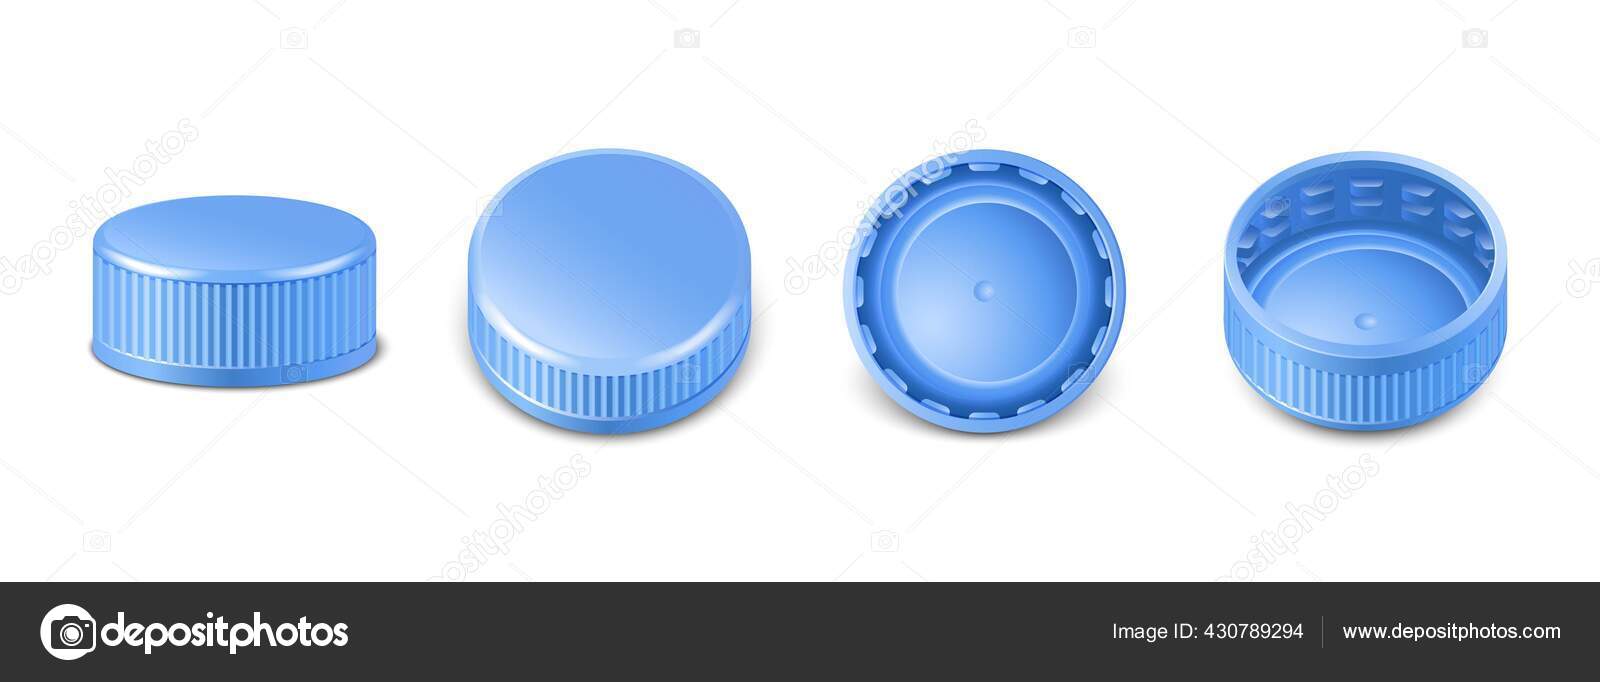 Download Realistic Collection Blue Plastic Bottle Caps Side Top Bottom View Stock Vector Royalty Free Vector Image By C Nikush21 430789294